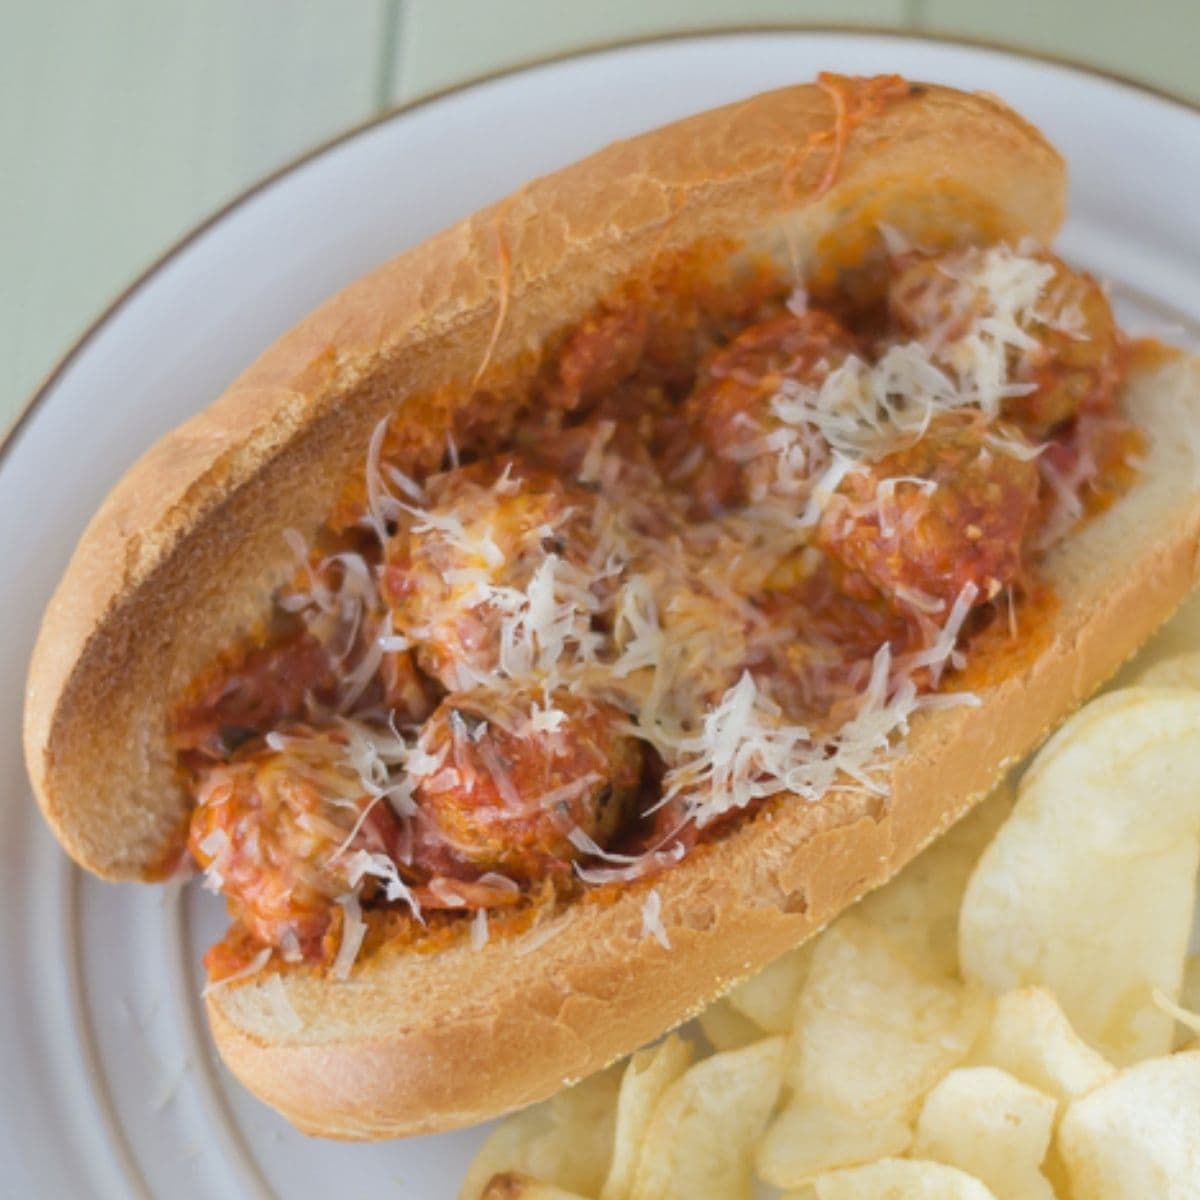 A Pepperoni Pizza Meatball Sub served with chips on a plate.